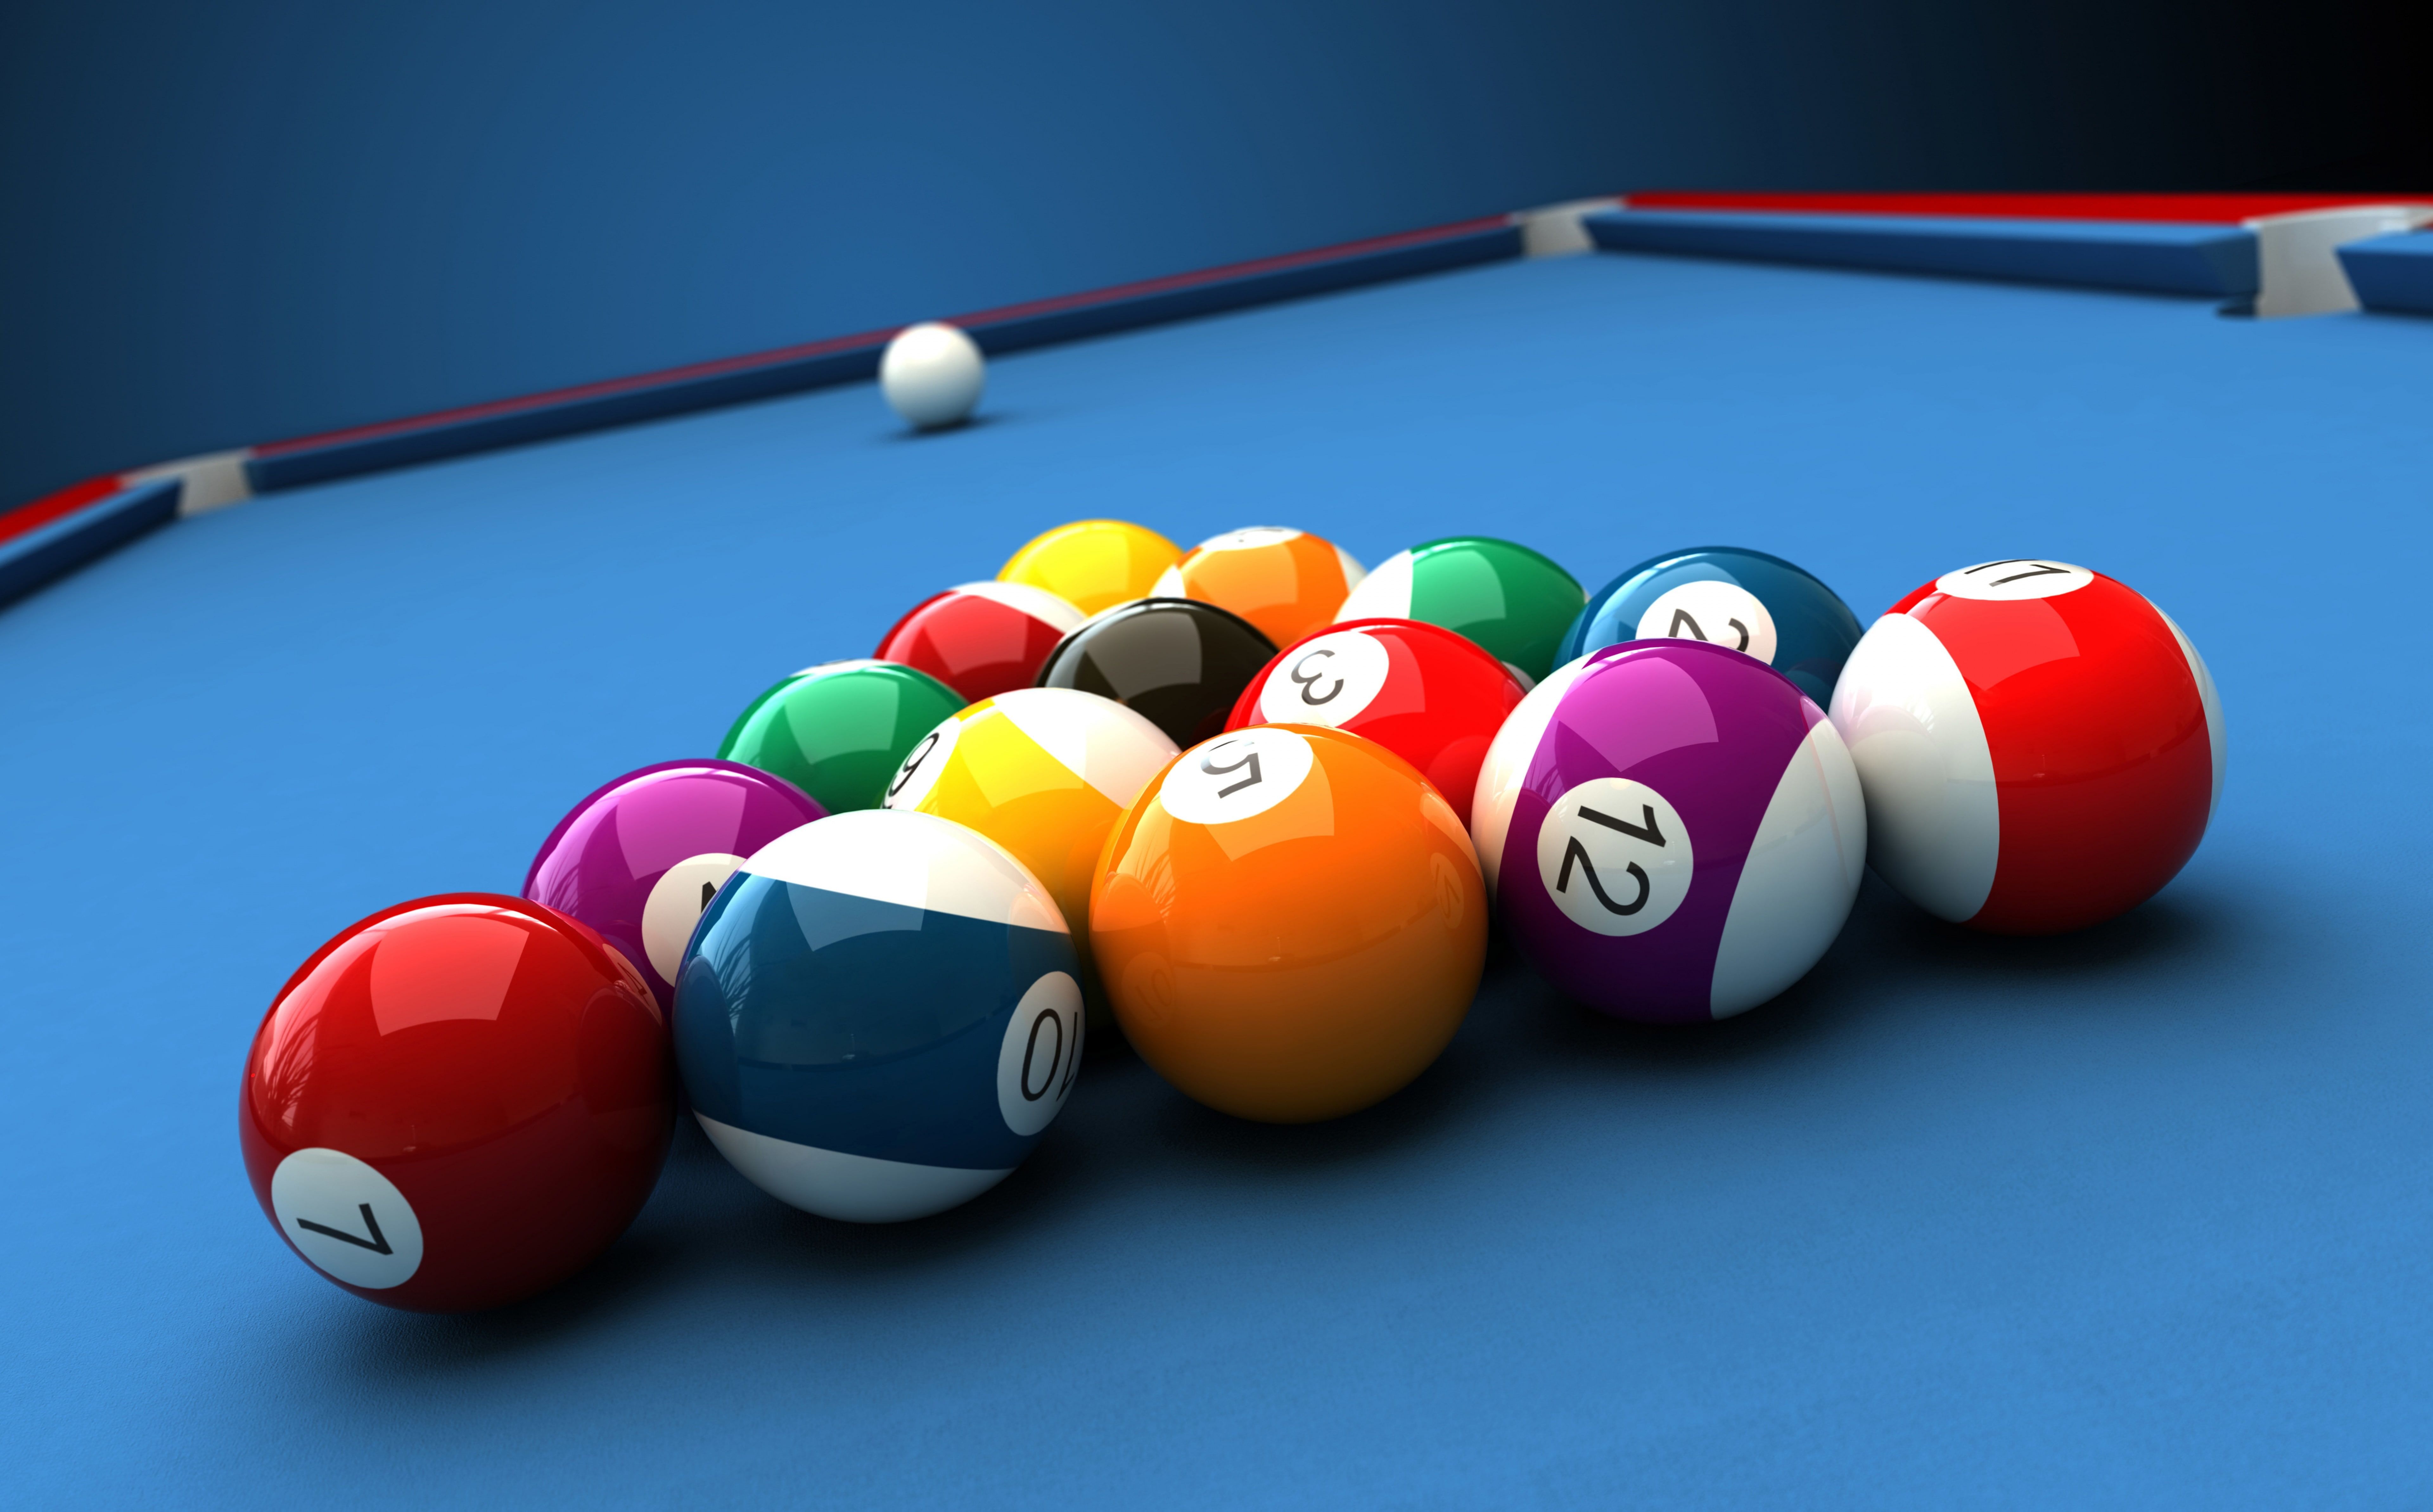 Billiard Game HD Wallpaper, Assorted Color Billiard Ball Set #Games Other Games #Colorful #Table #Colors #Game #Balls #Spo. Billiards Game, Pool Balls, Pool Games